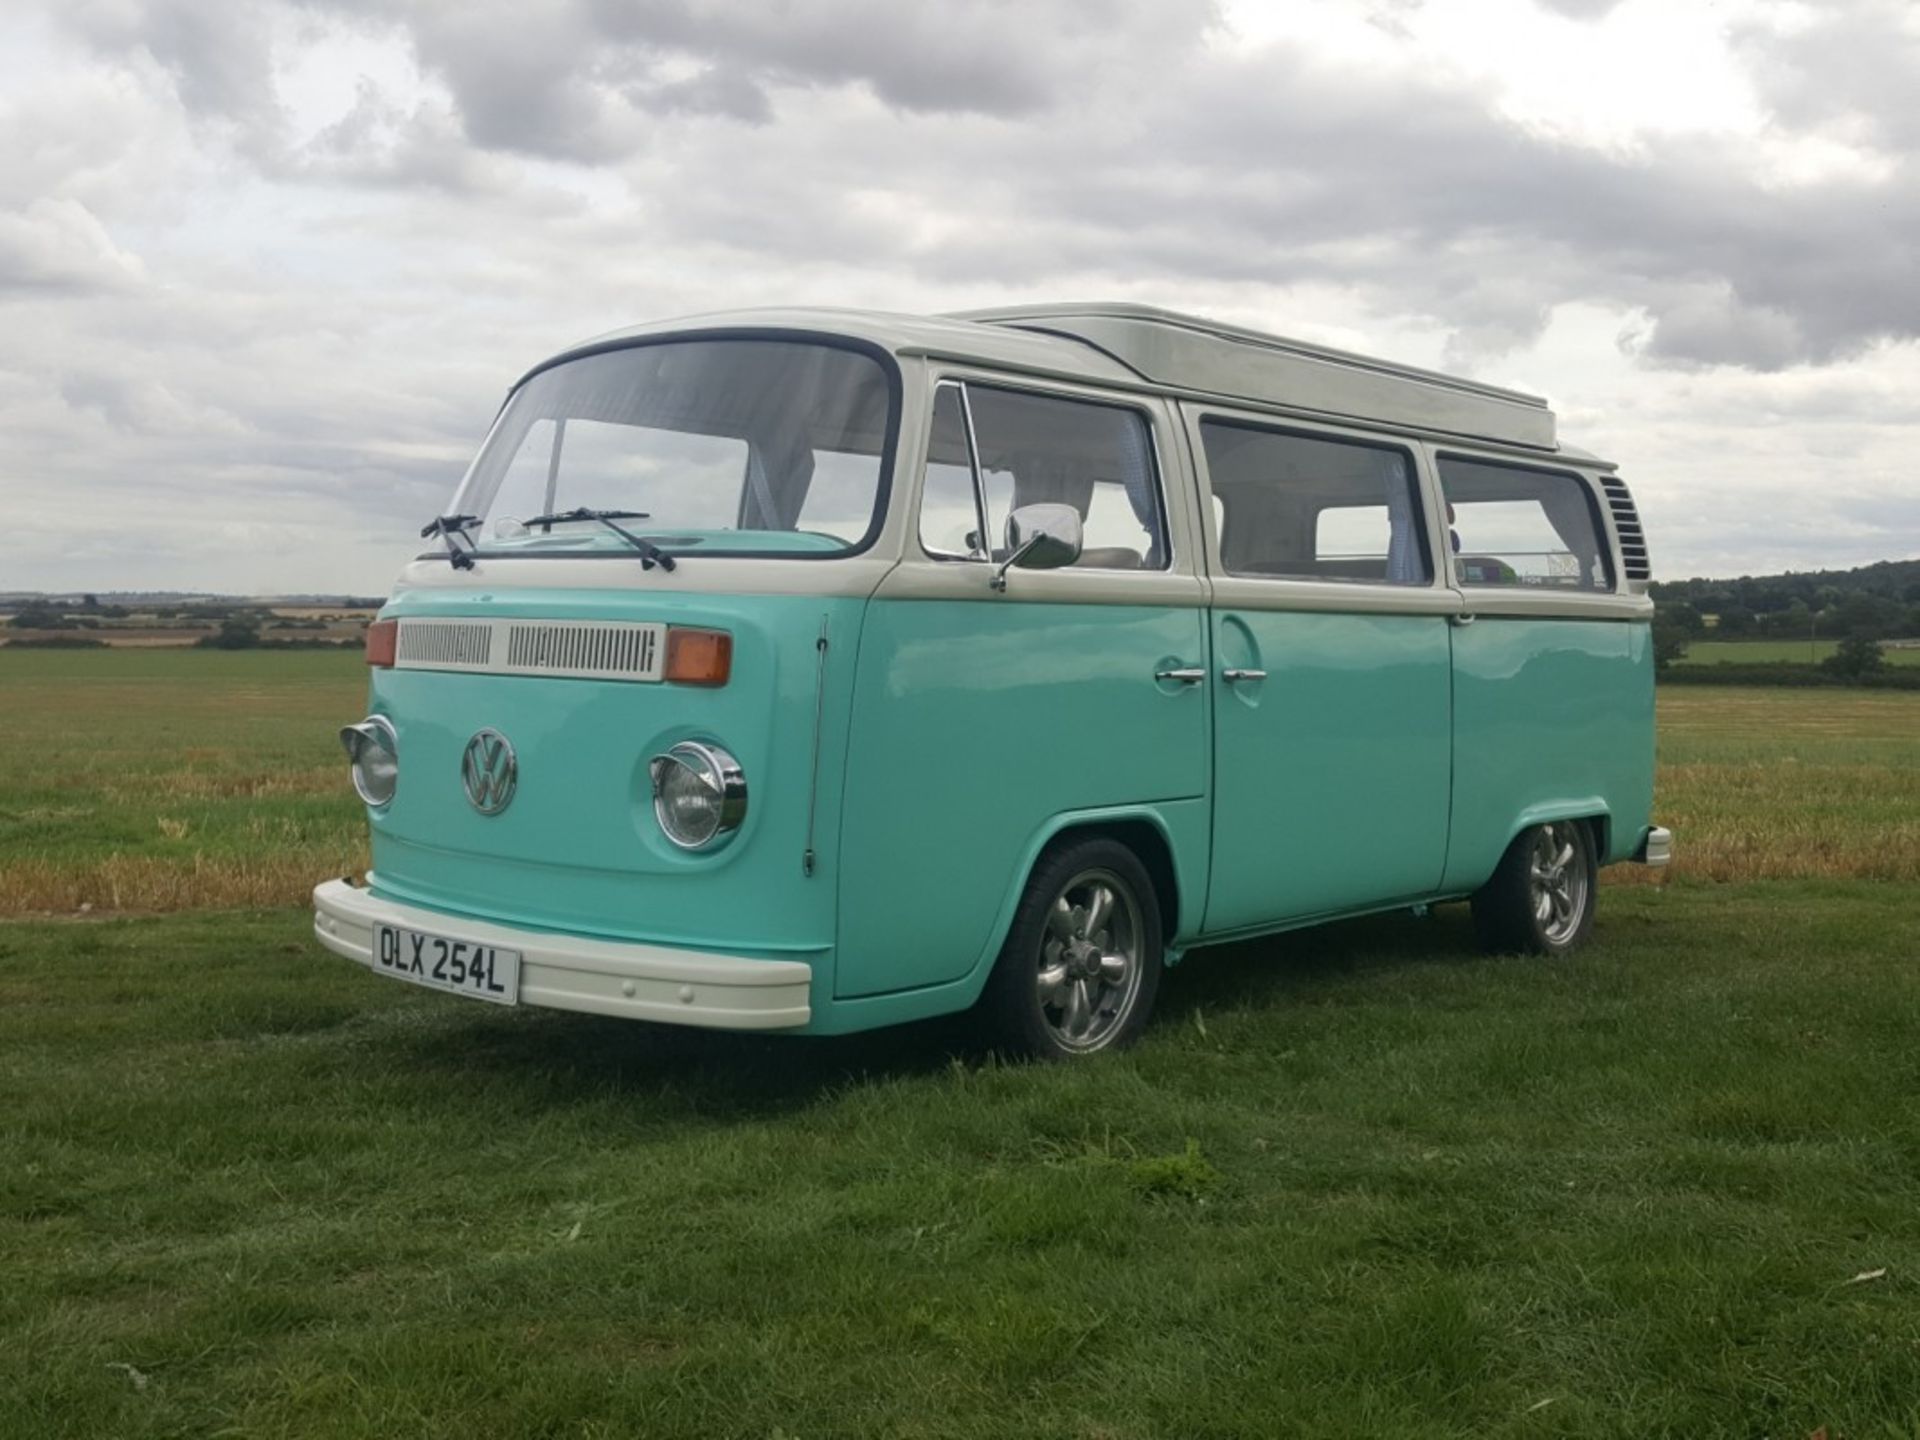 Volkswagen T2 Camper “Cal Look”1600cc Twin Carb 1972 - Image 15 of 21